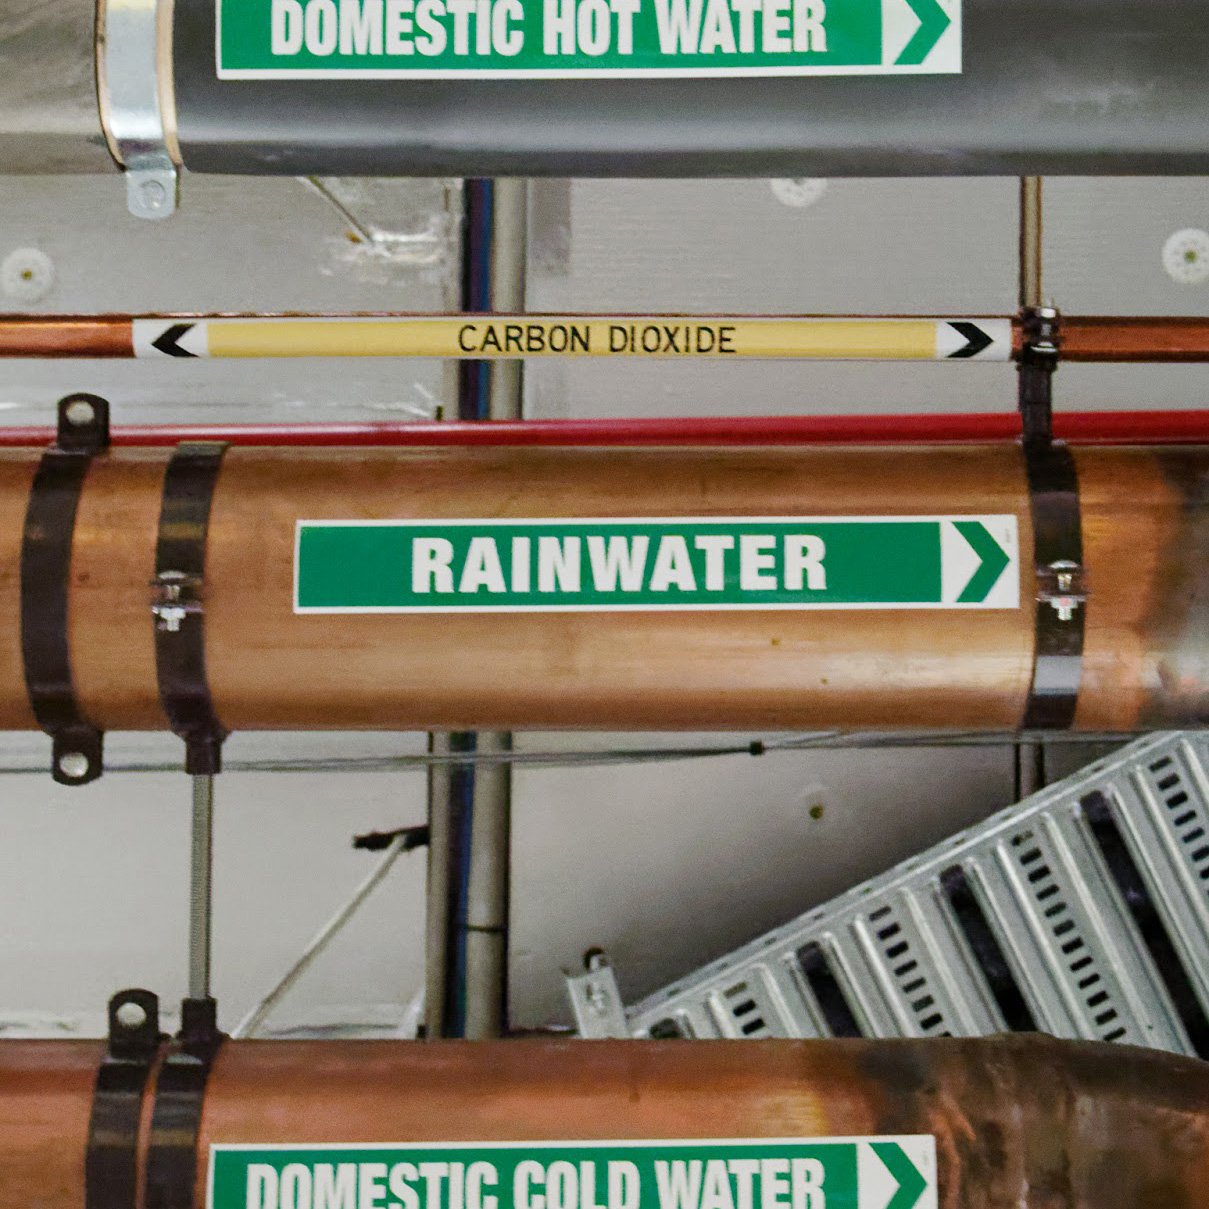 Water pipes labeled domestic water and rainwater